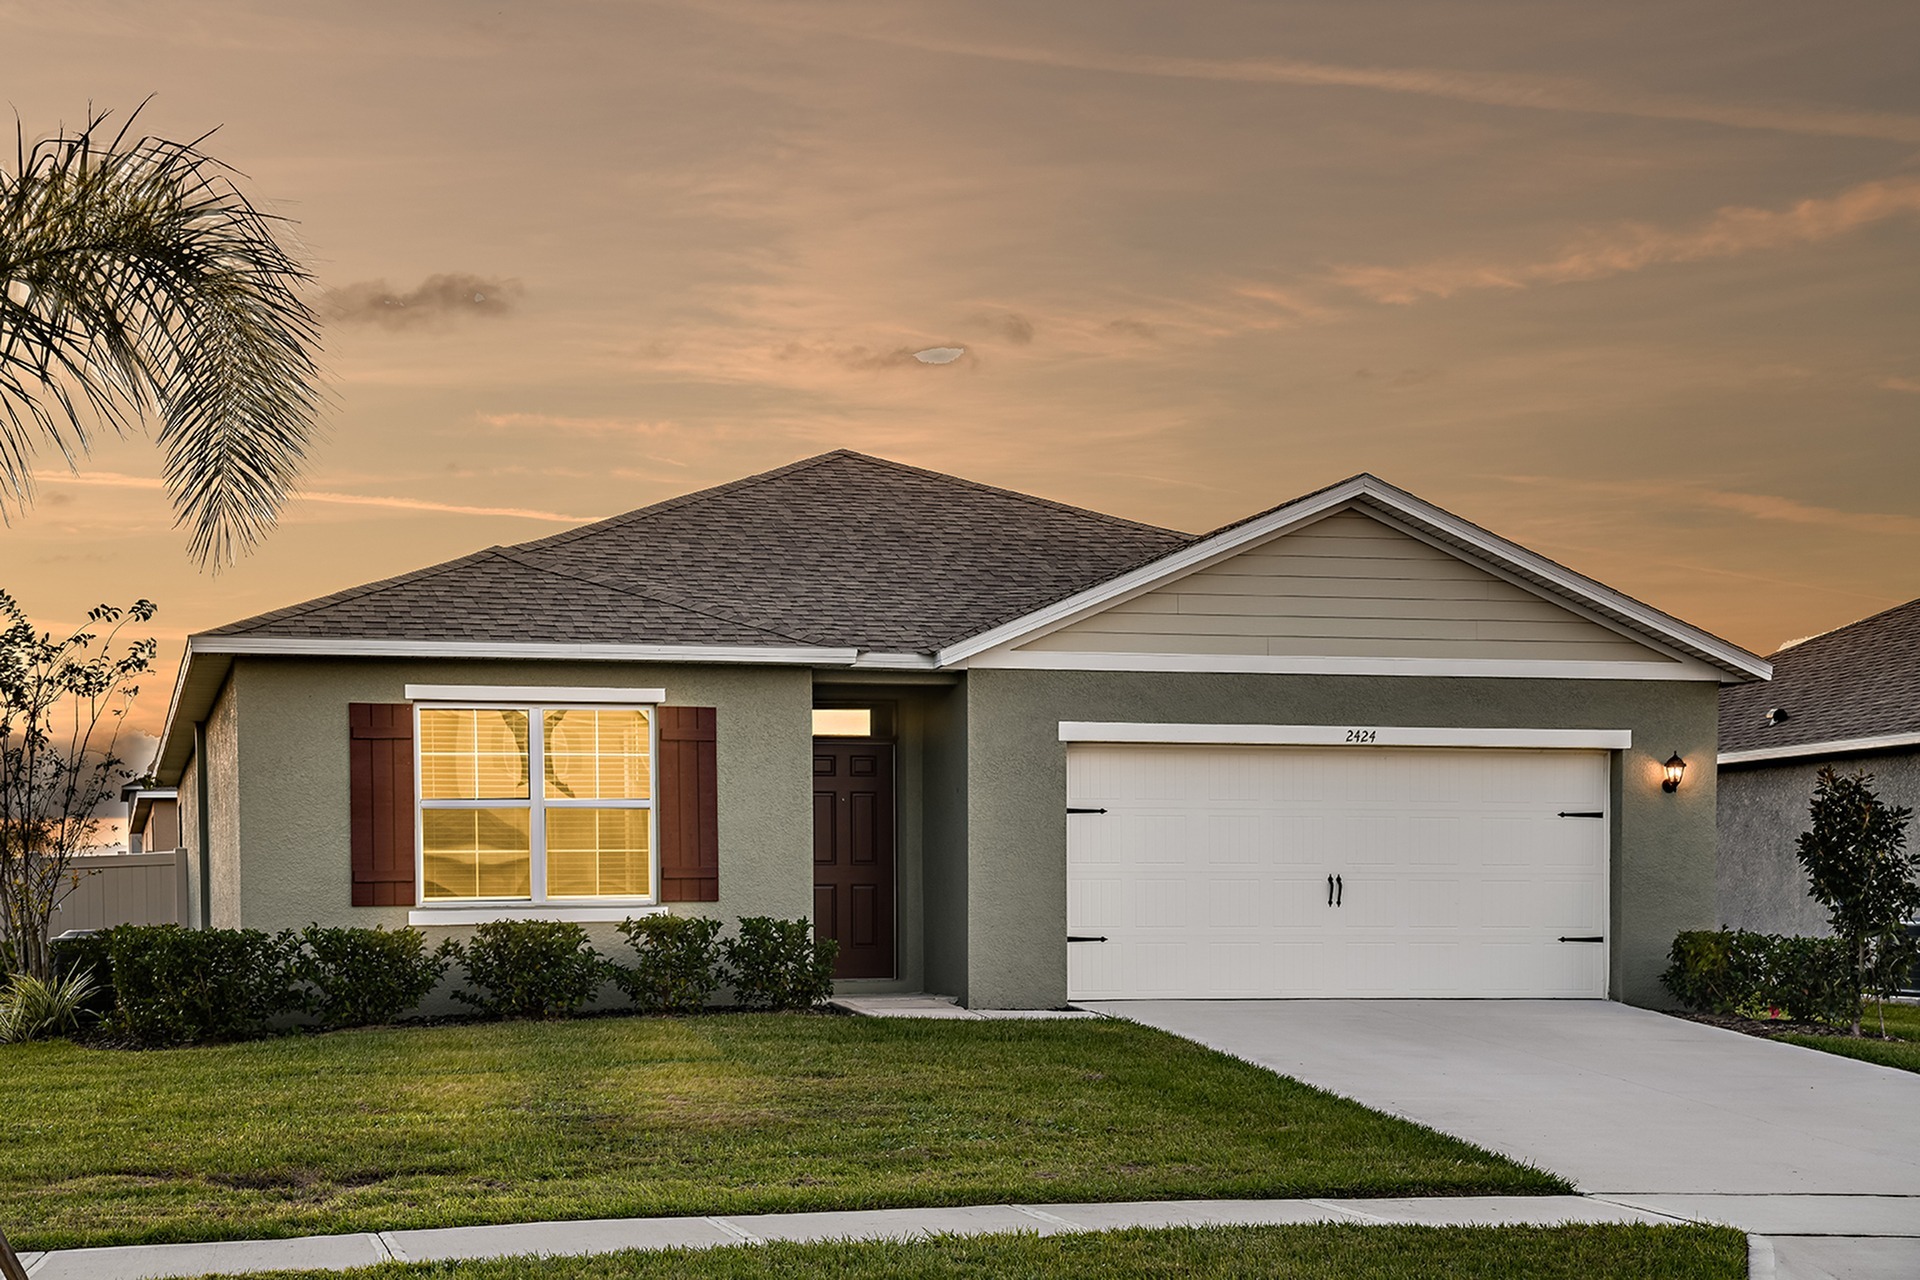 Exterior view of home with attached garage during a beautiful sunset for rent in Apopka, Florida.